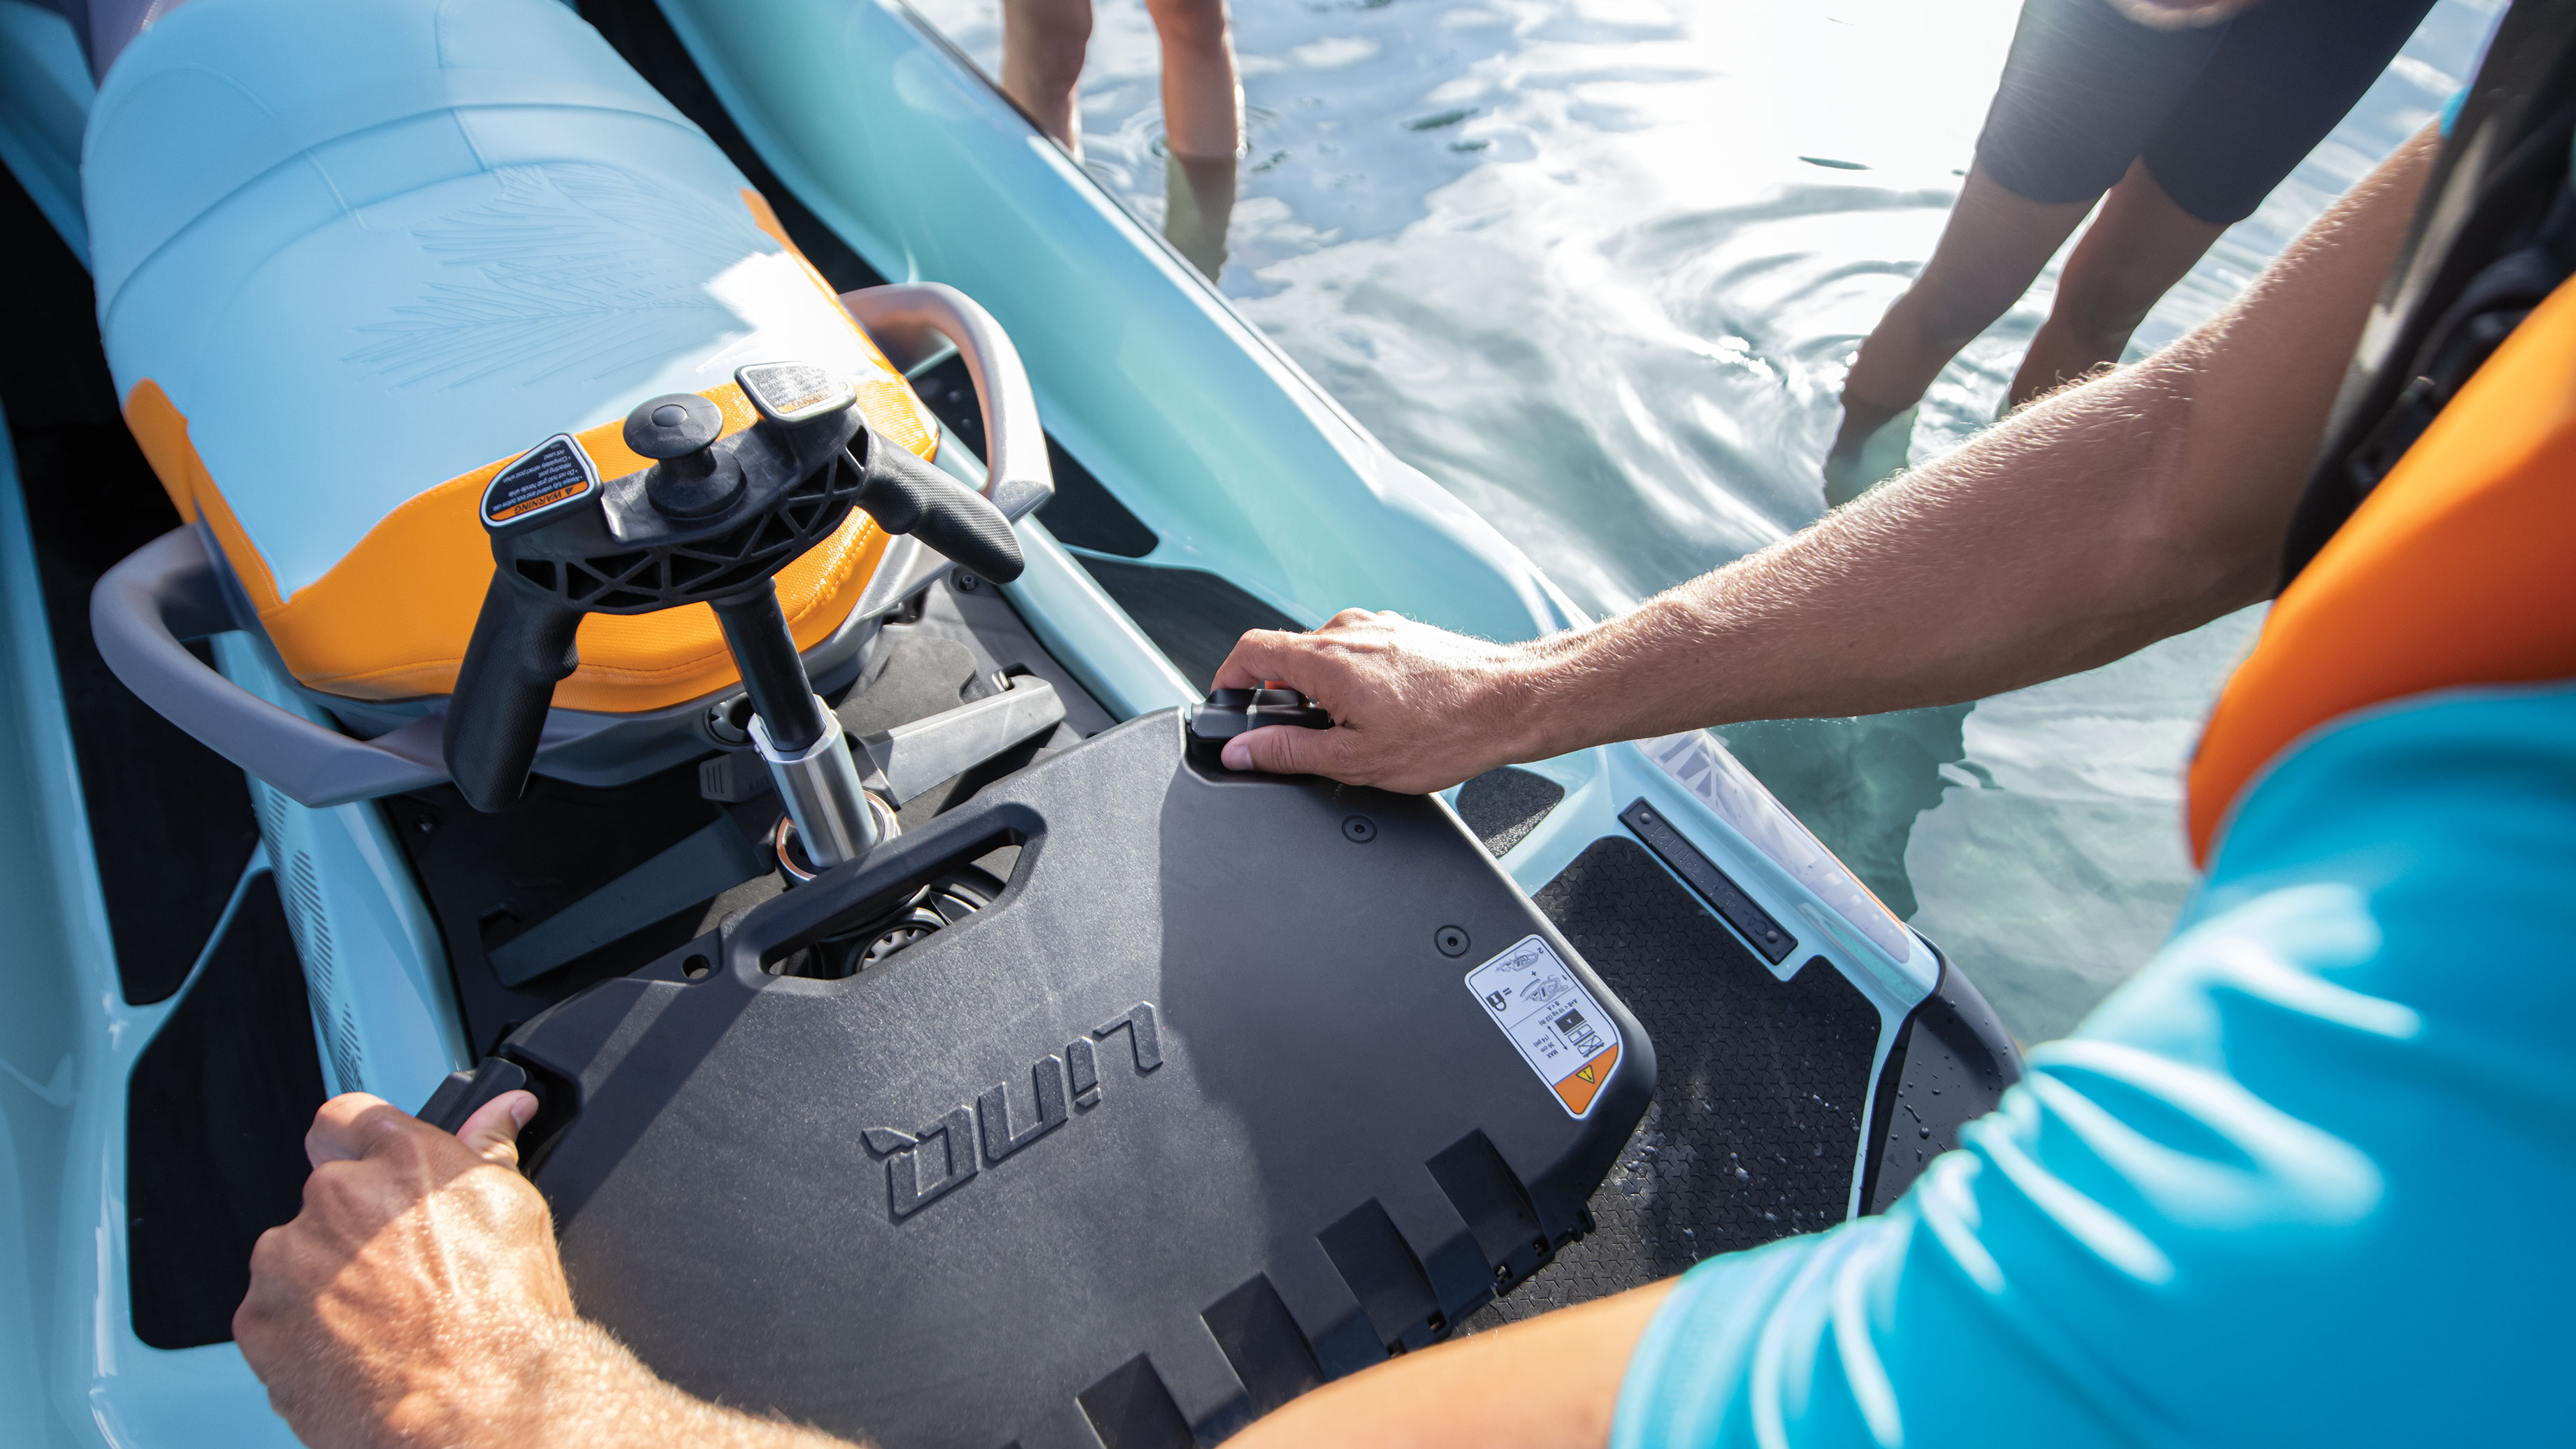 Using LinQ Accessories on your personal watercraft - Sea-Doo